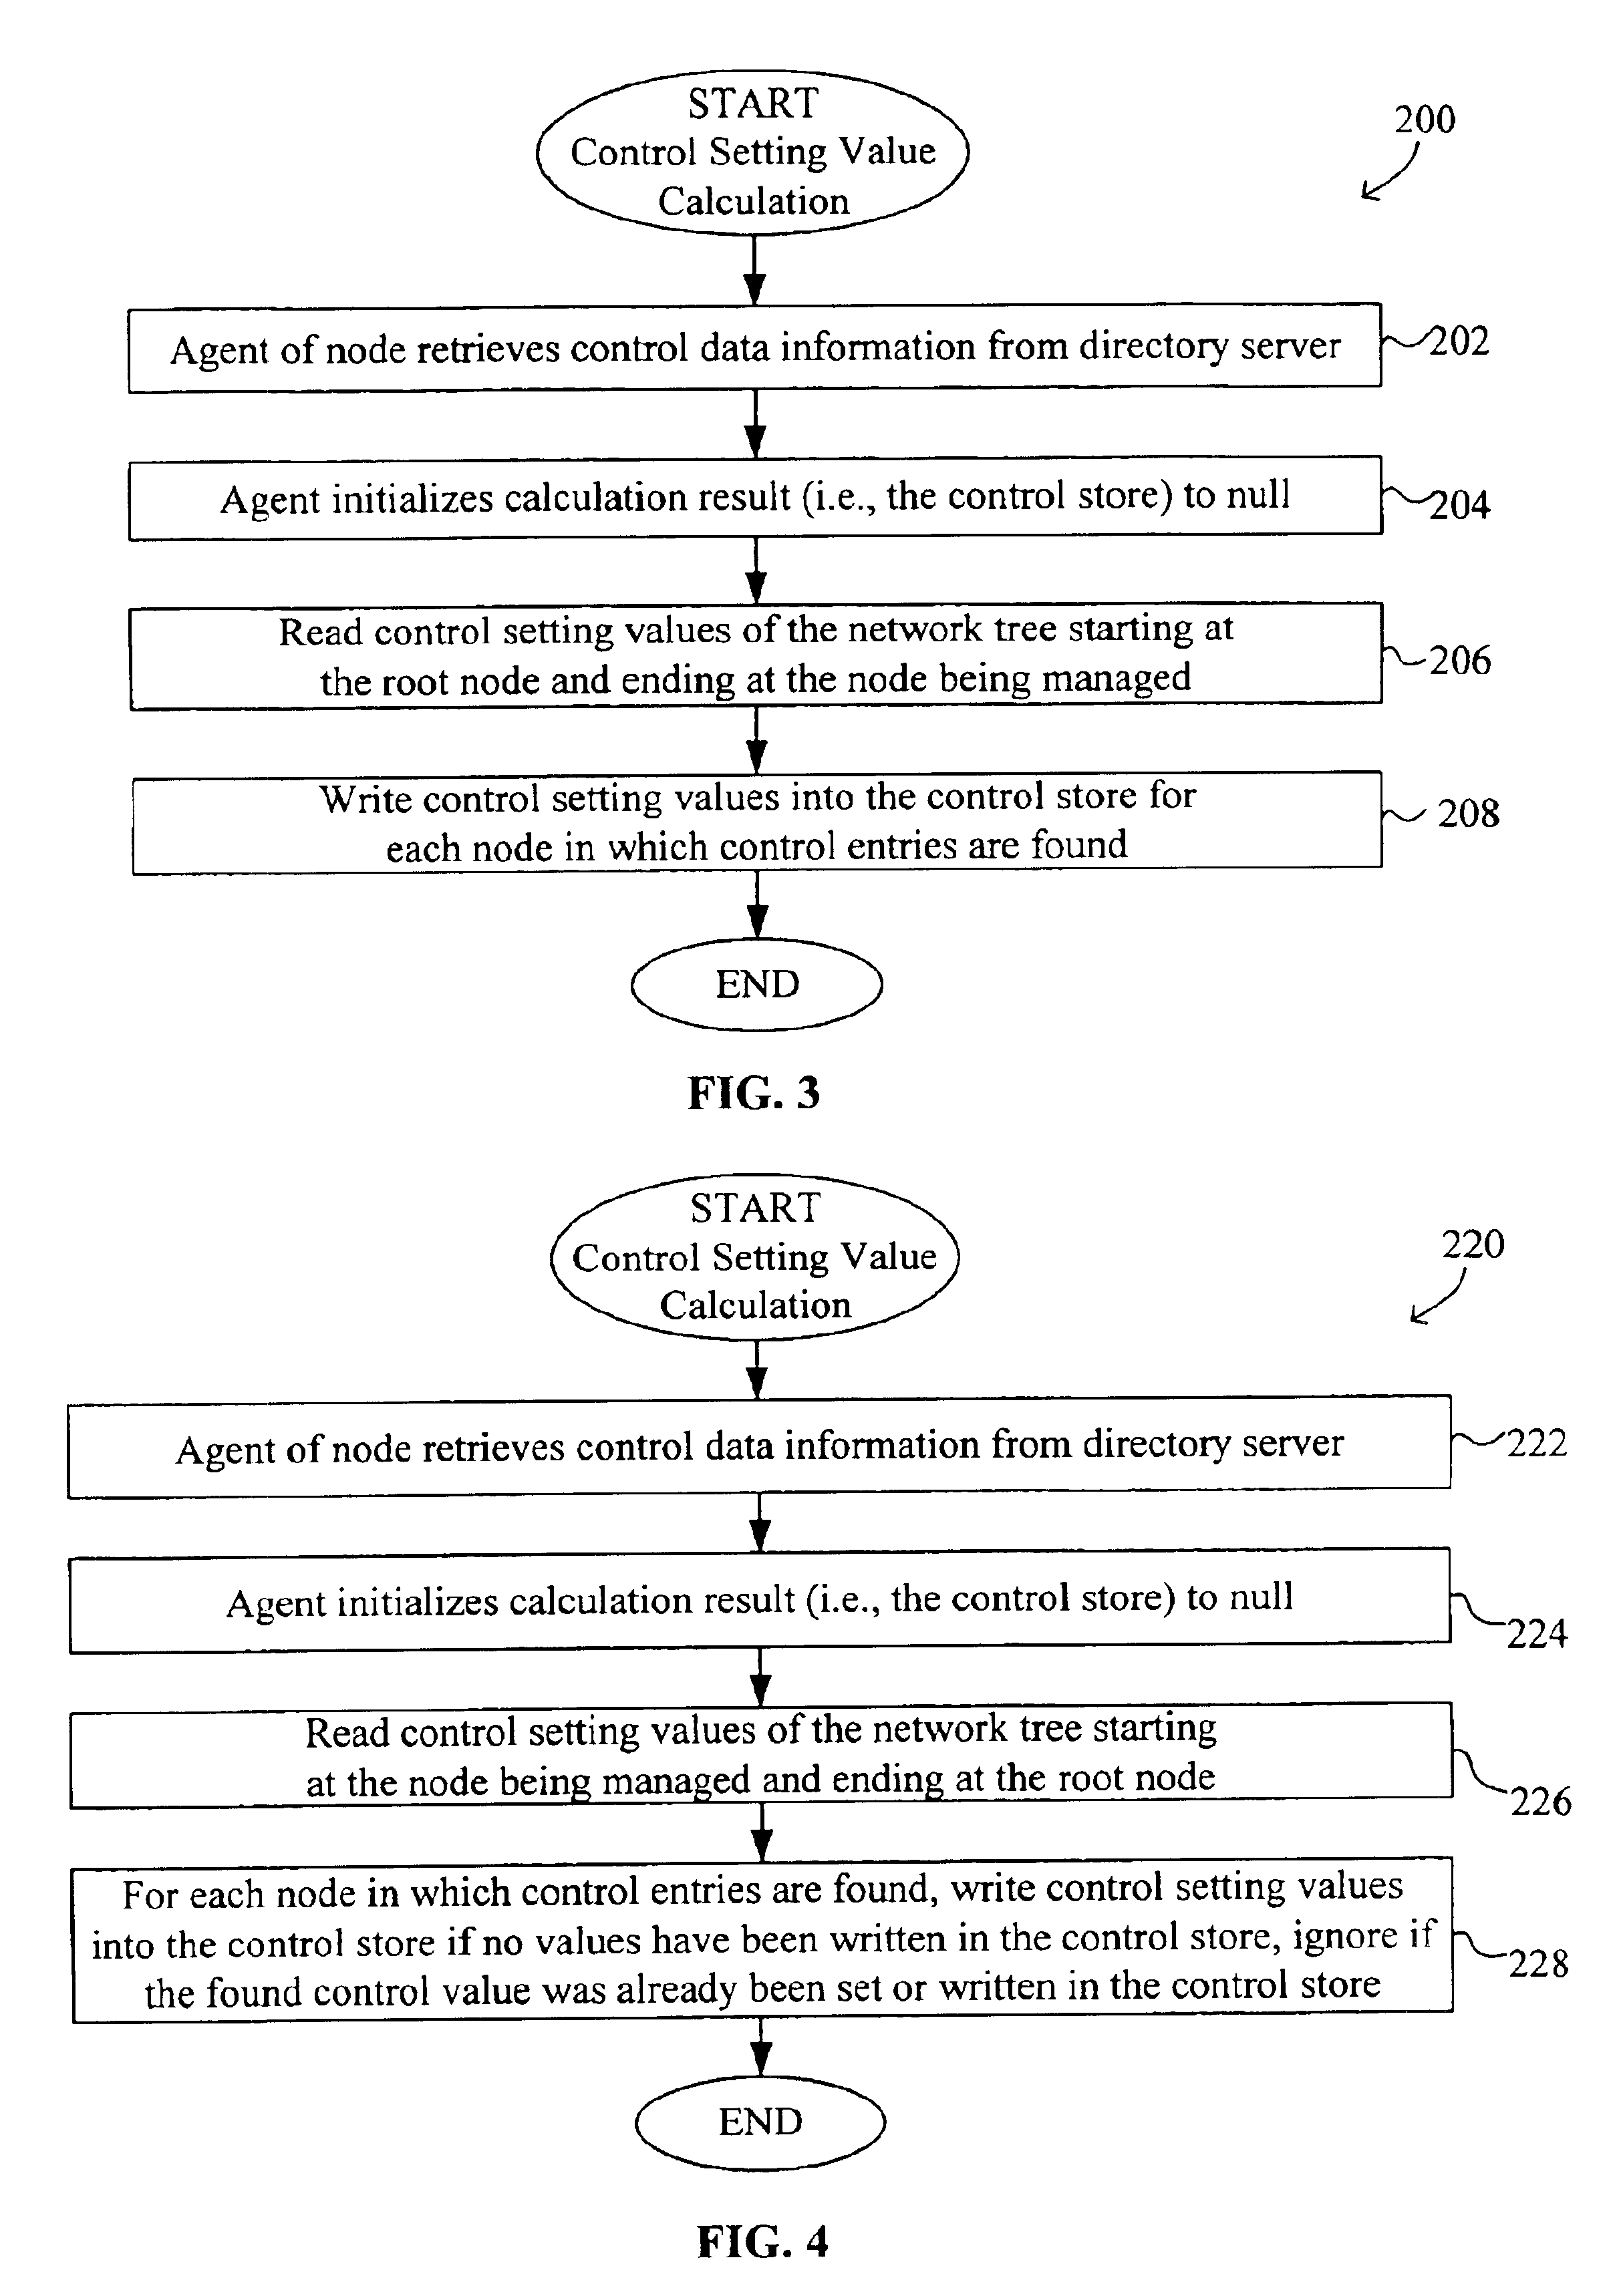 System and method for configuration, management, and monitoring of a computer network using inheritance